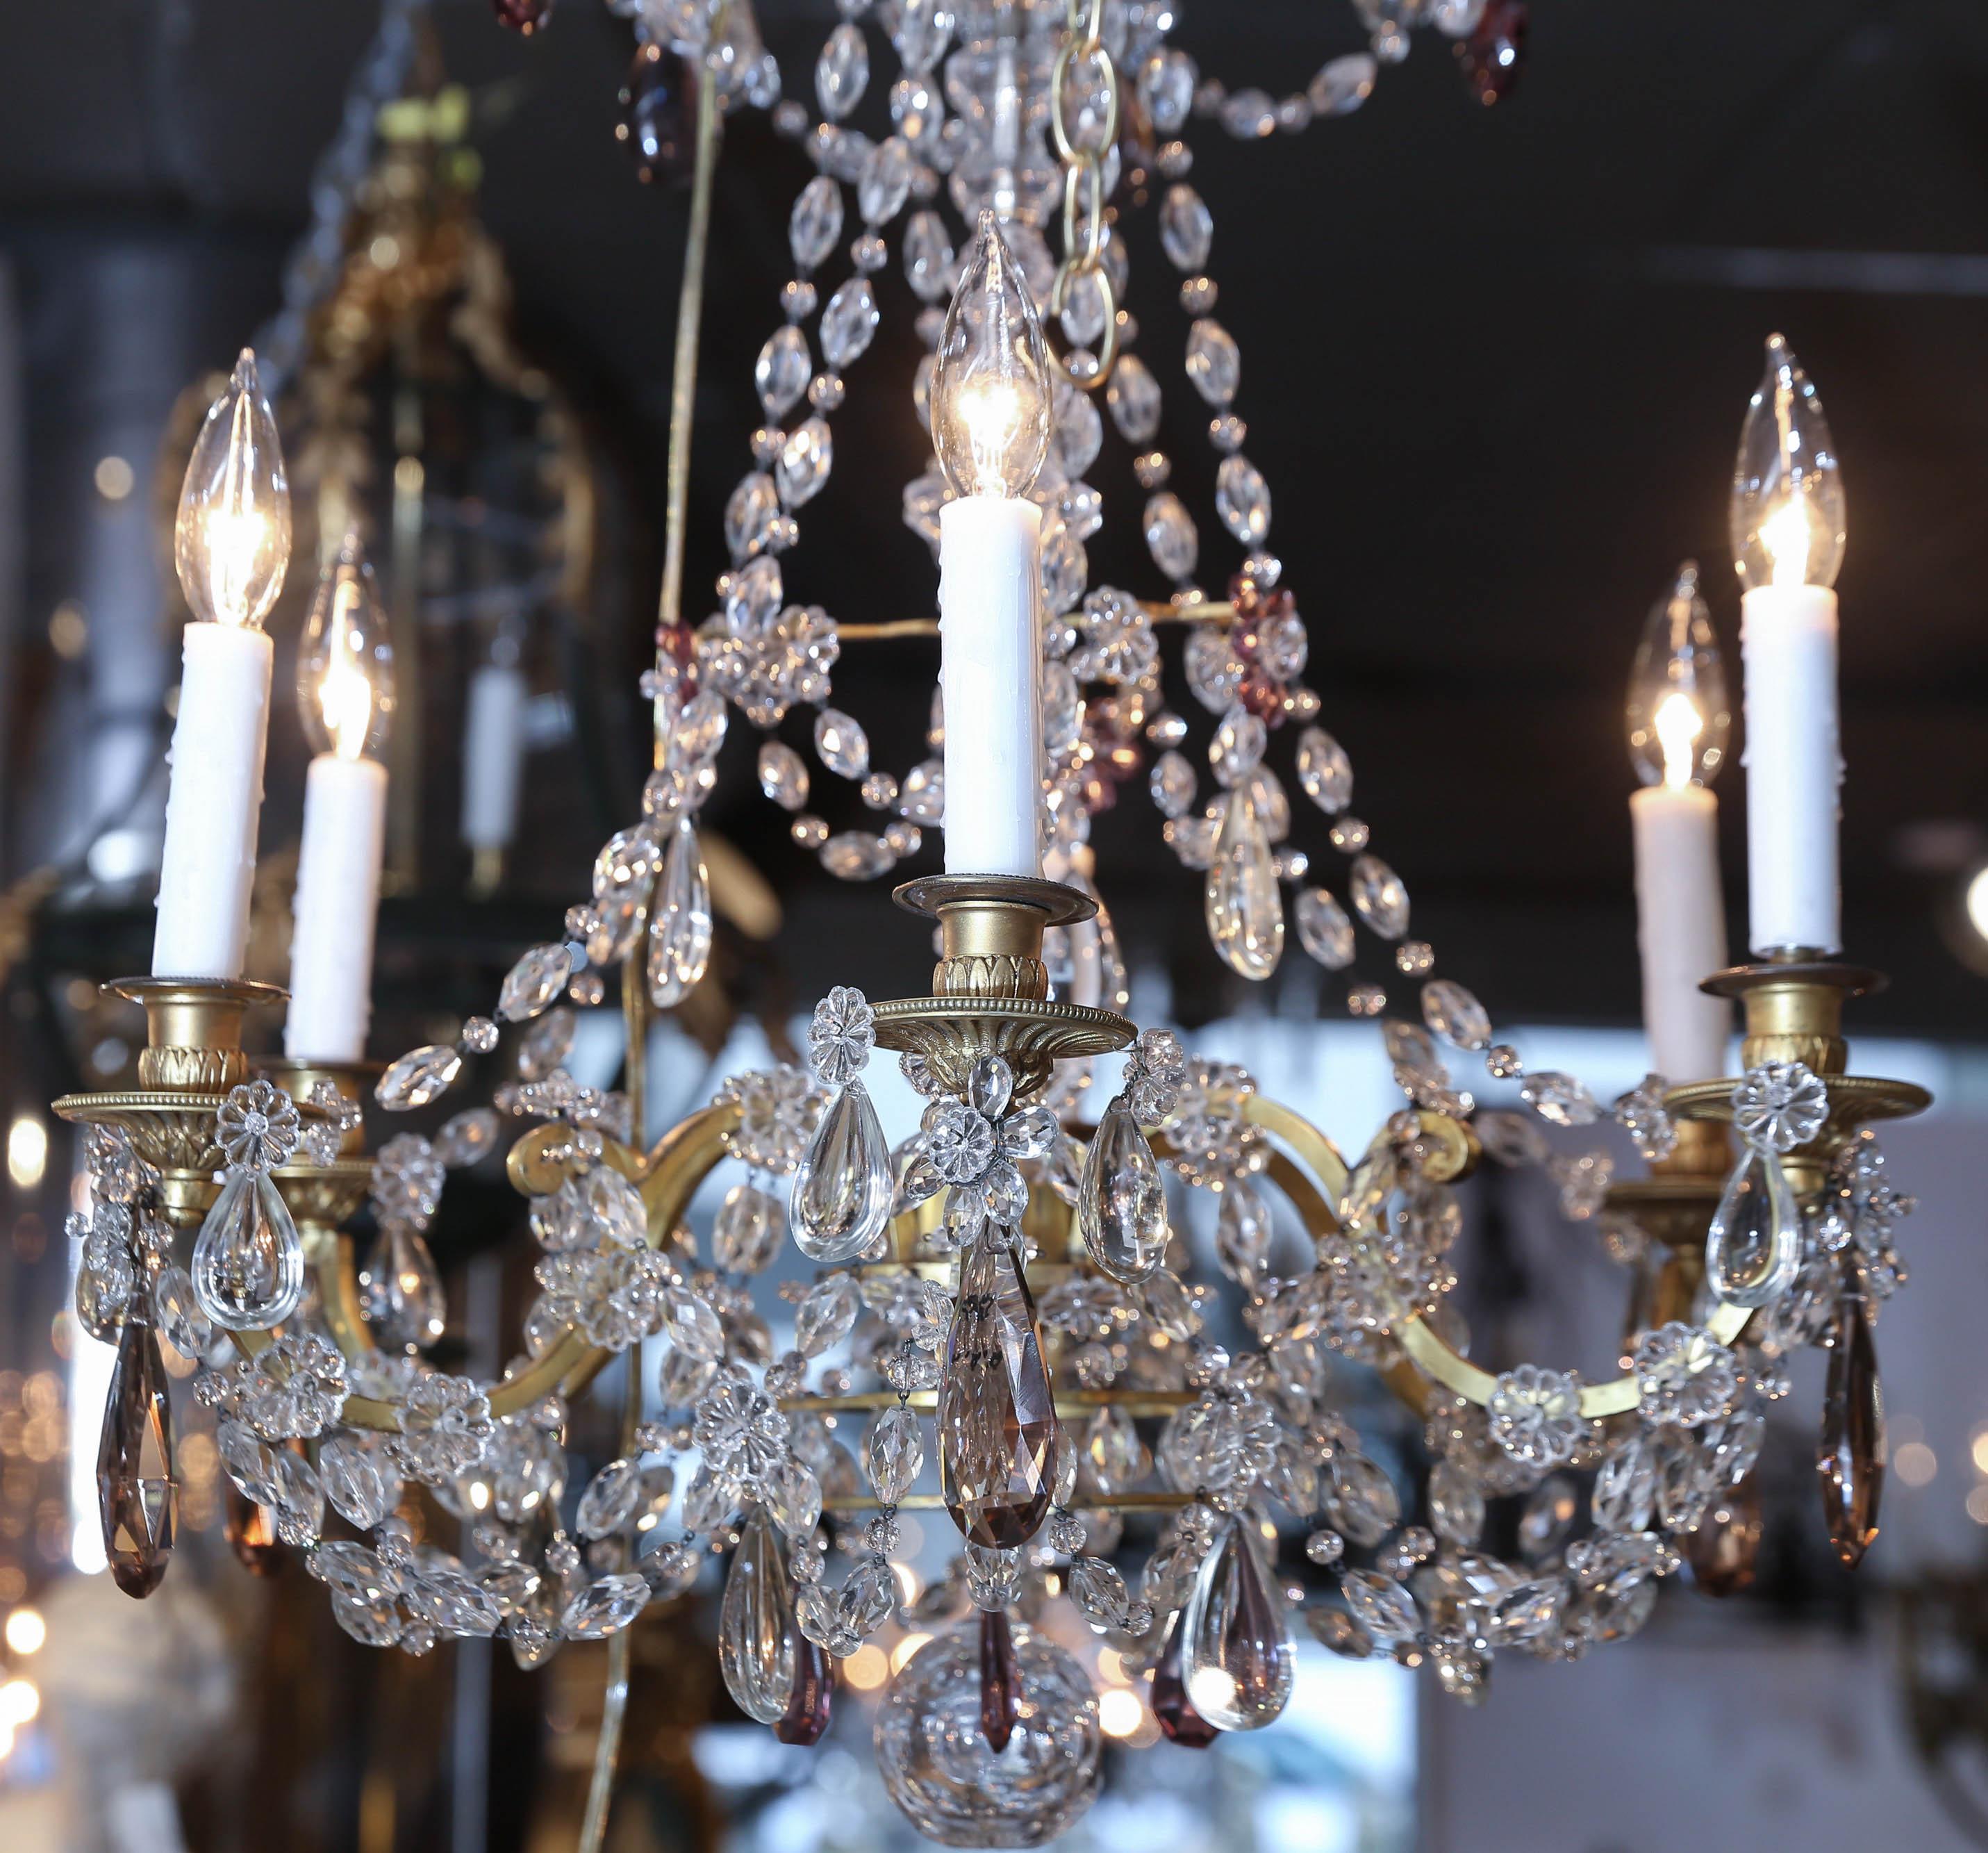 Lovely petite chandelier in the Marie Antoinette style with clear crystal
And accented with amythest and bronze crystals. It has 6 lights. Wiring 
Is in very good condition and ready to hang. It has scrolling arms in
Gilt bronze with a beautiful